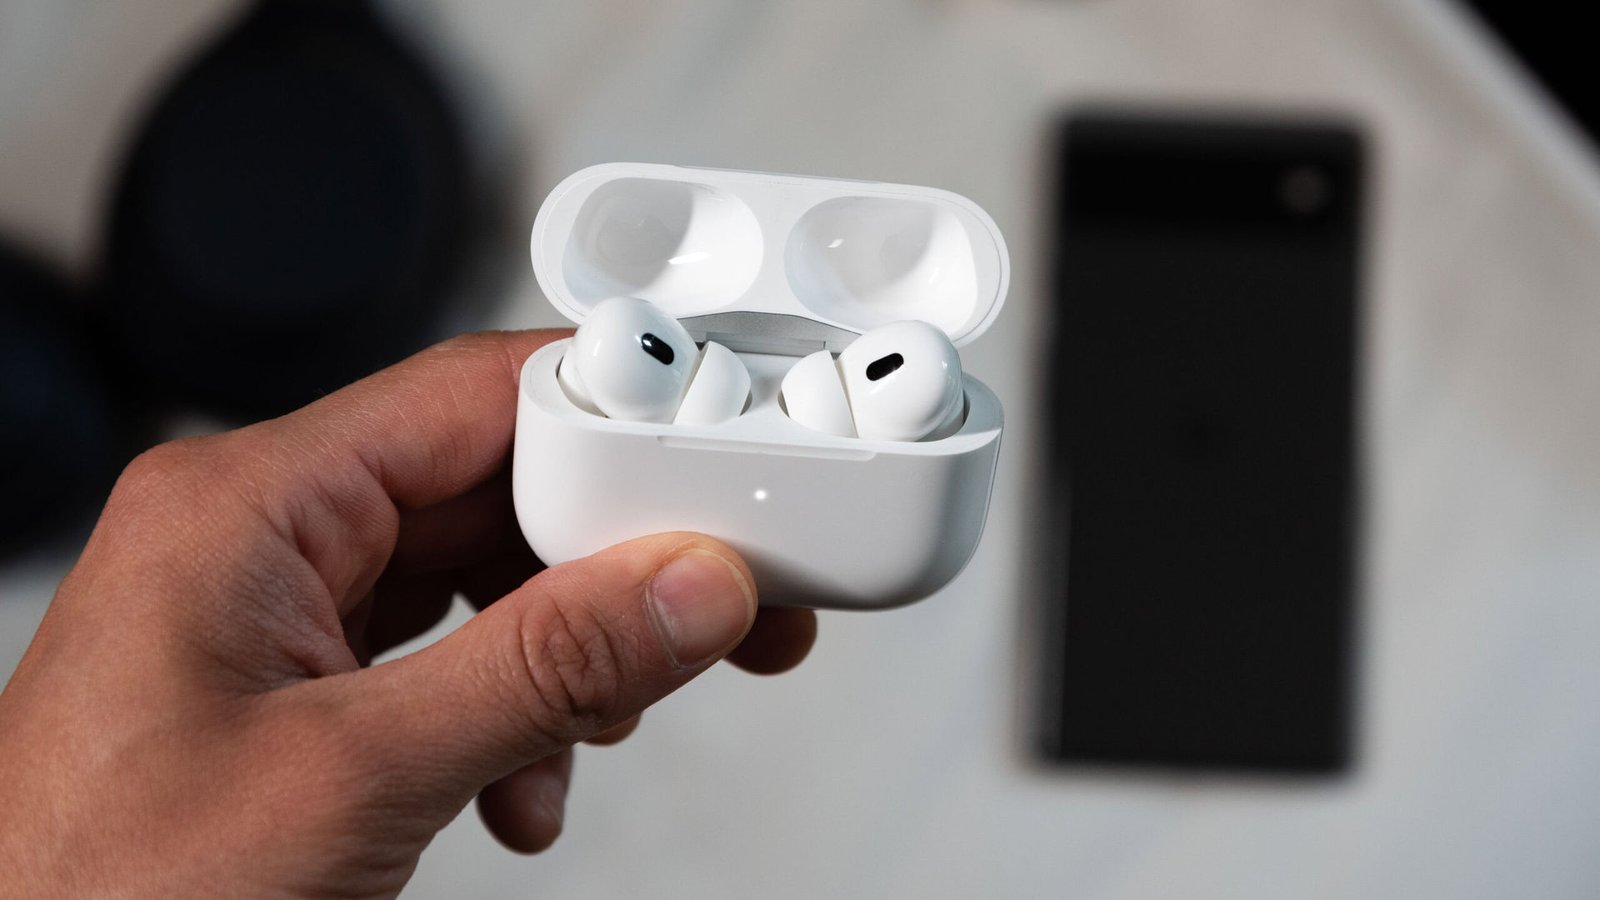 iOS 18 lets you tune your AirPods Pro 2’s noise cancellation